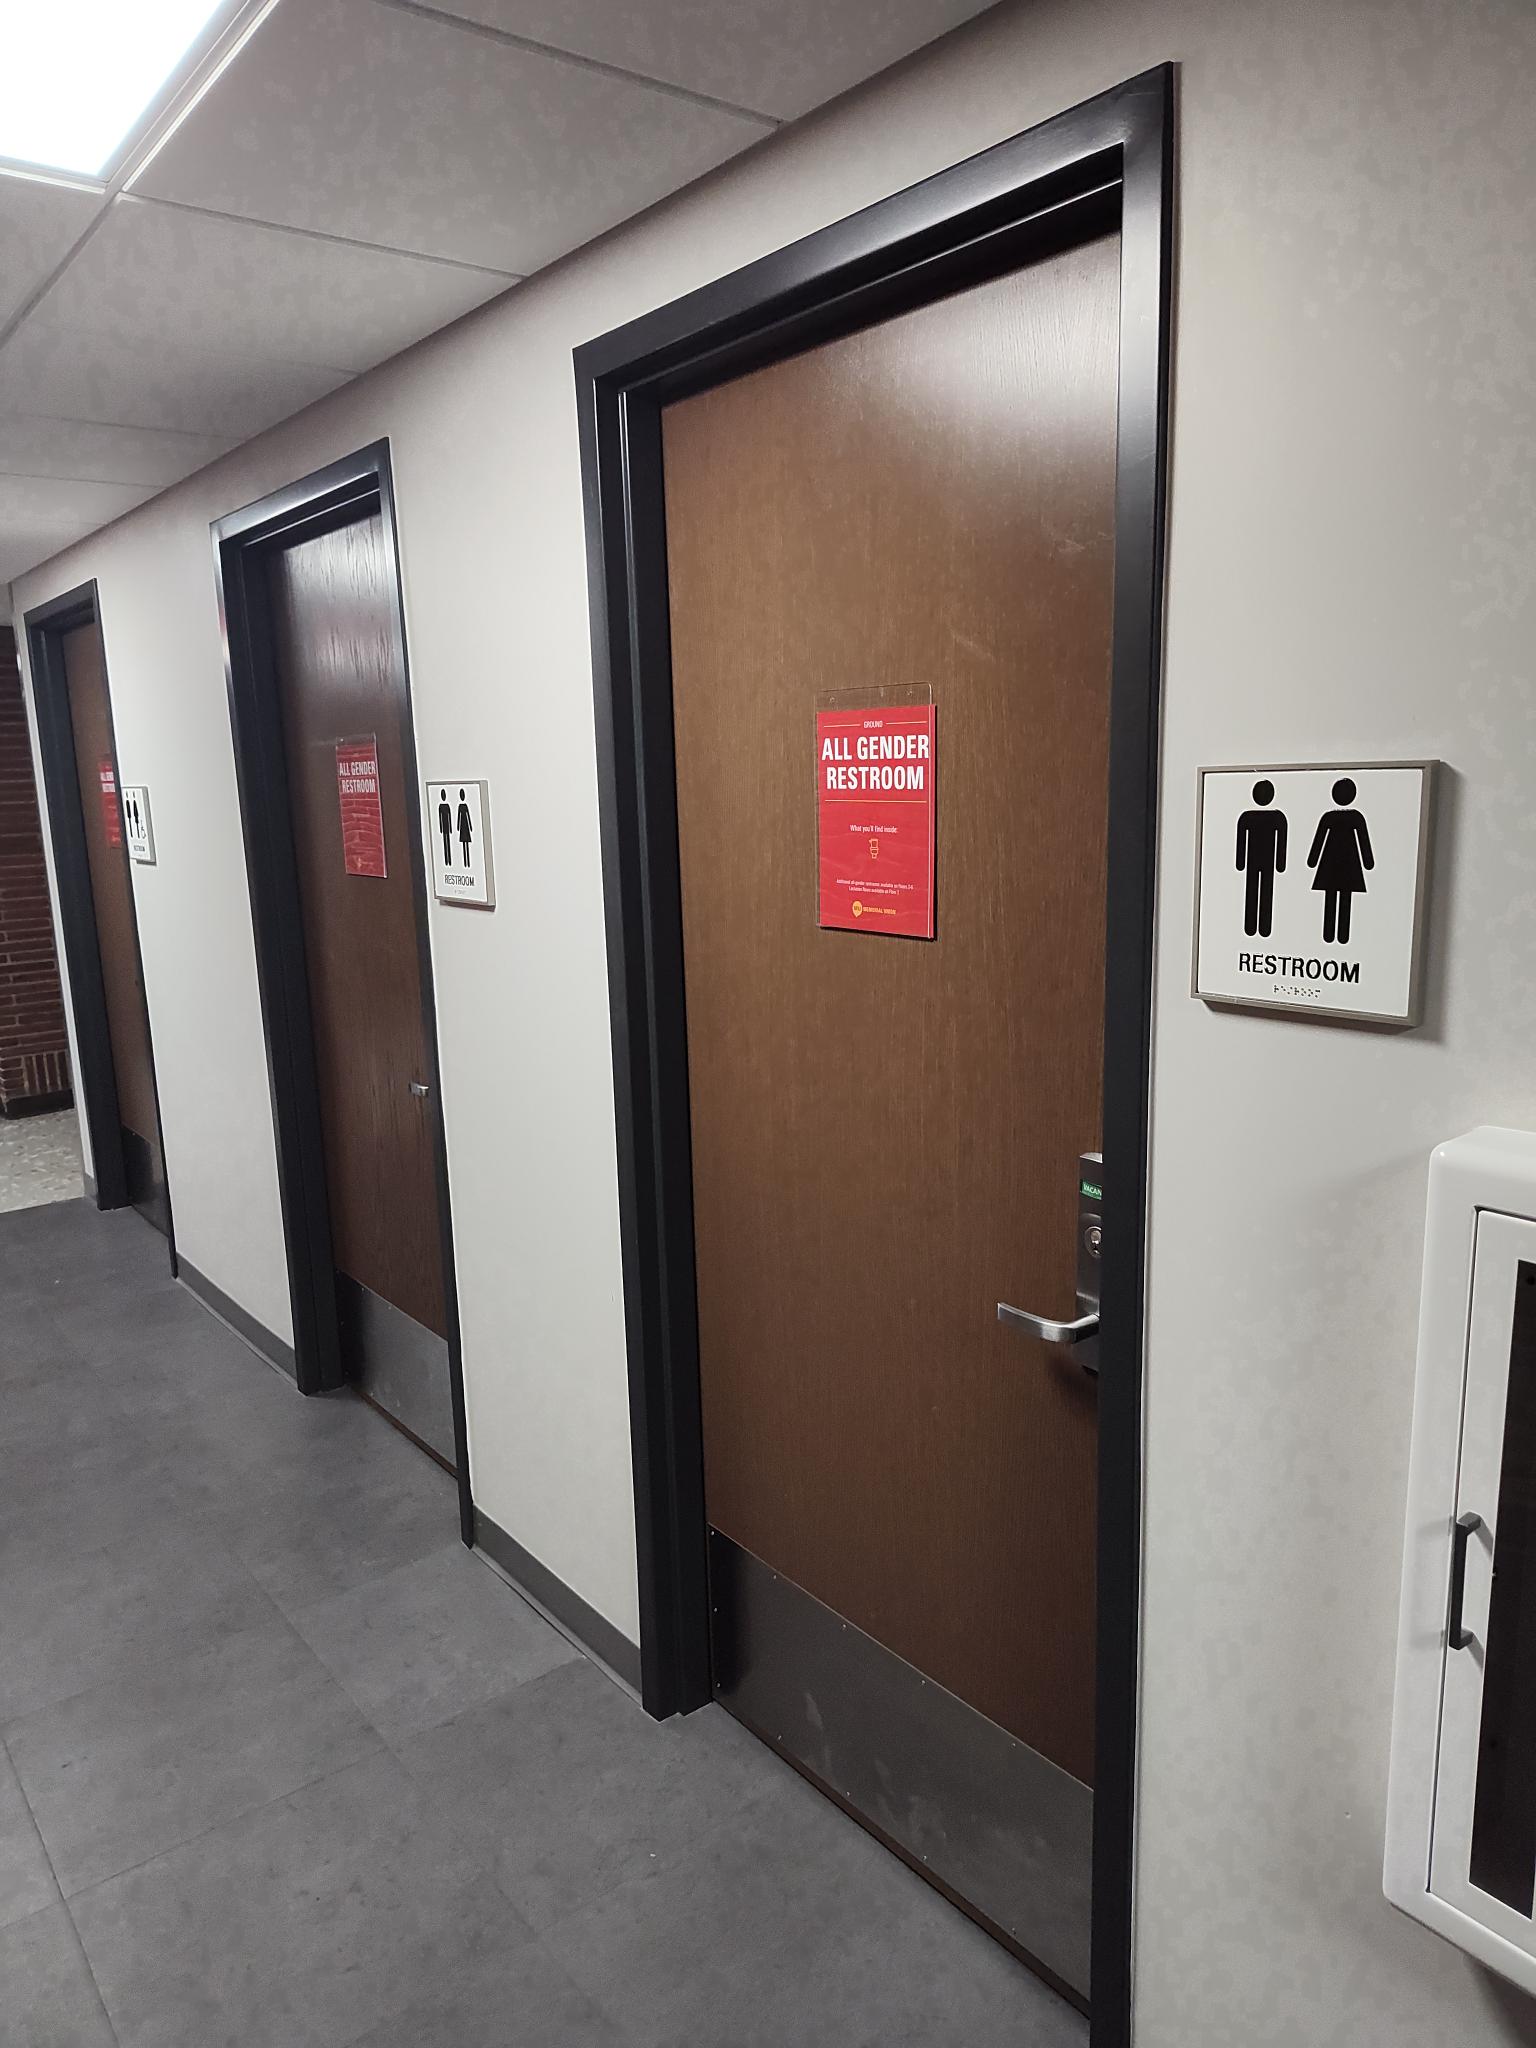 All Gender Restroom in the basement of the memorial union